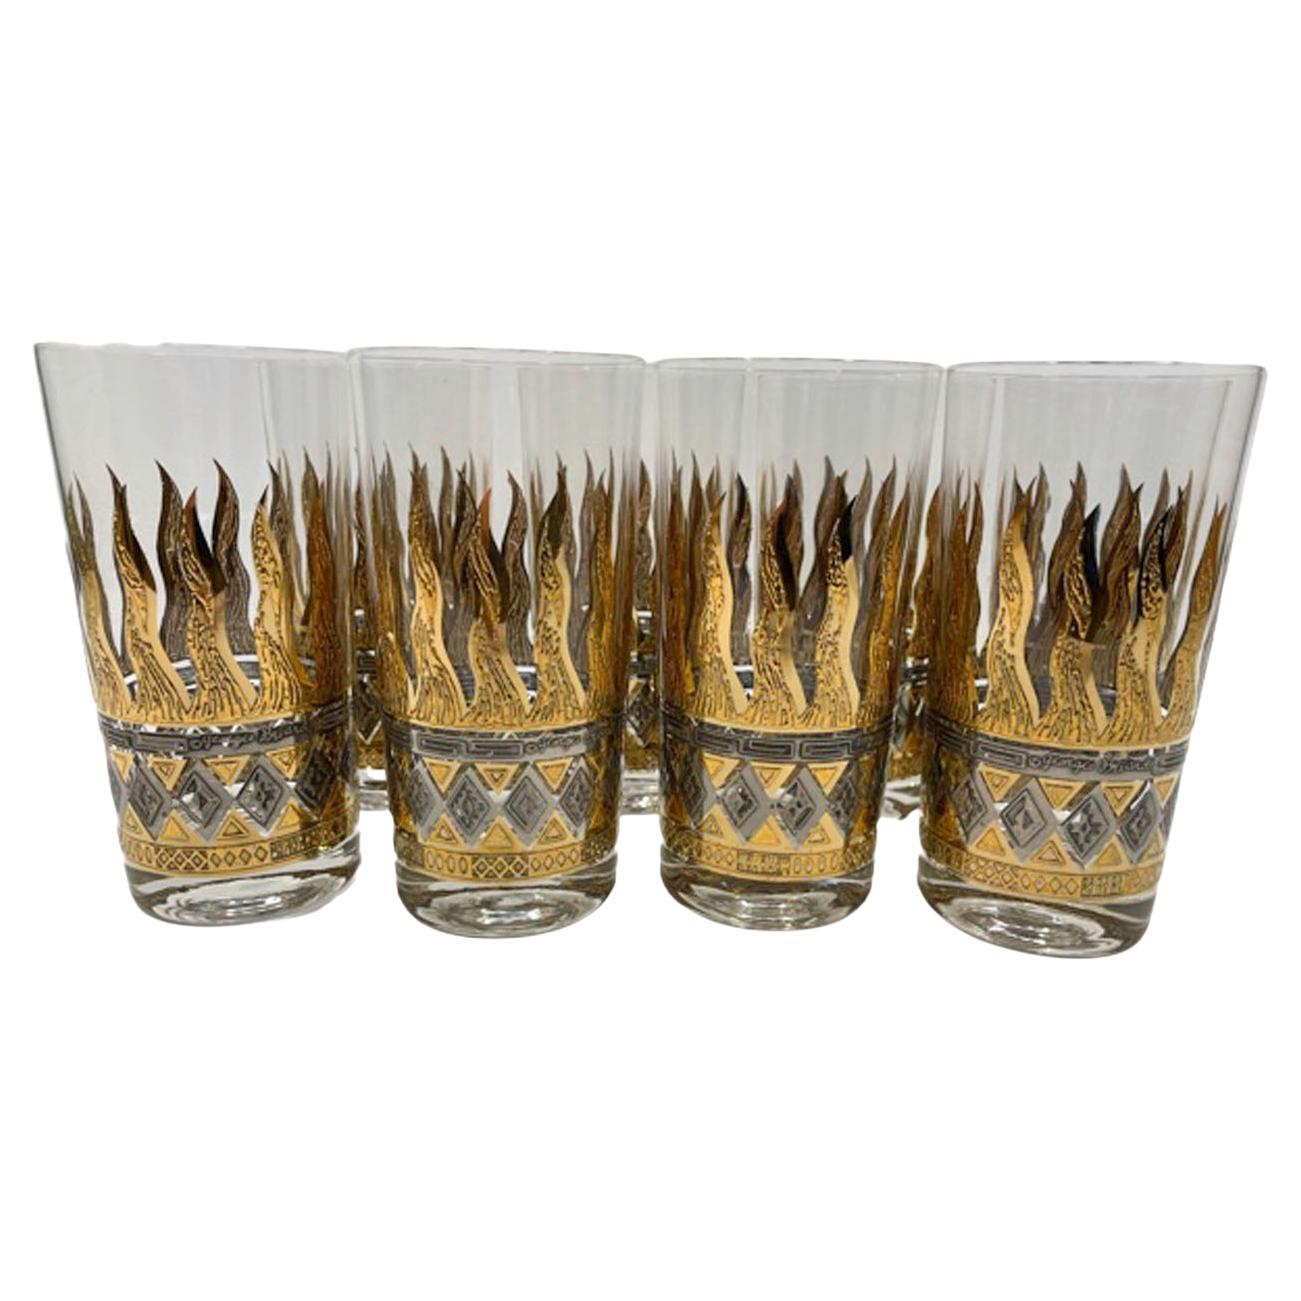 Vintage Georges Briard Highball Glasses with Golden Flames, Gold & Silver Bands